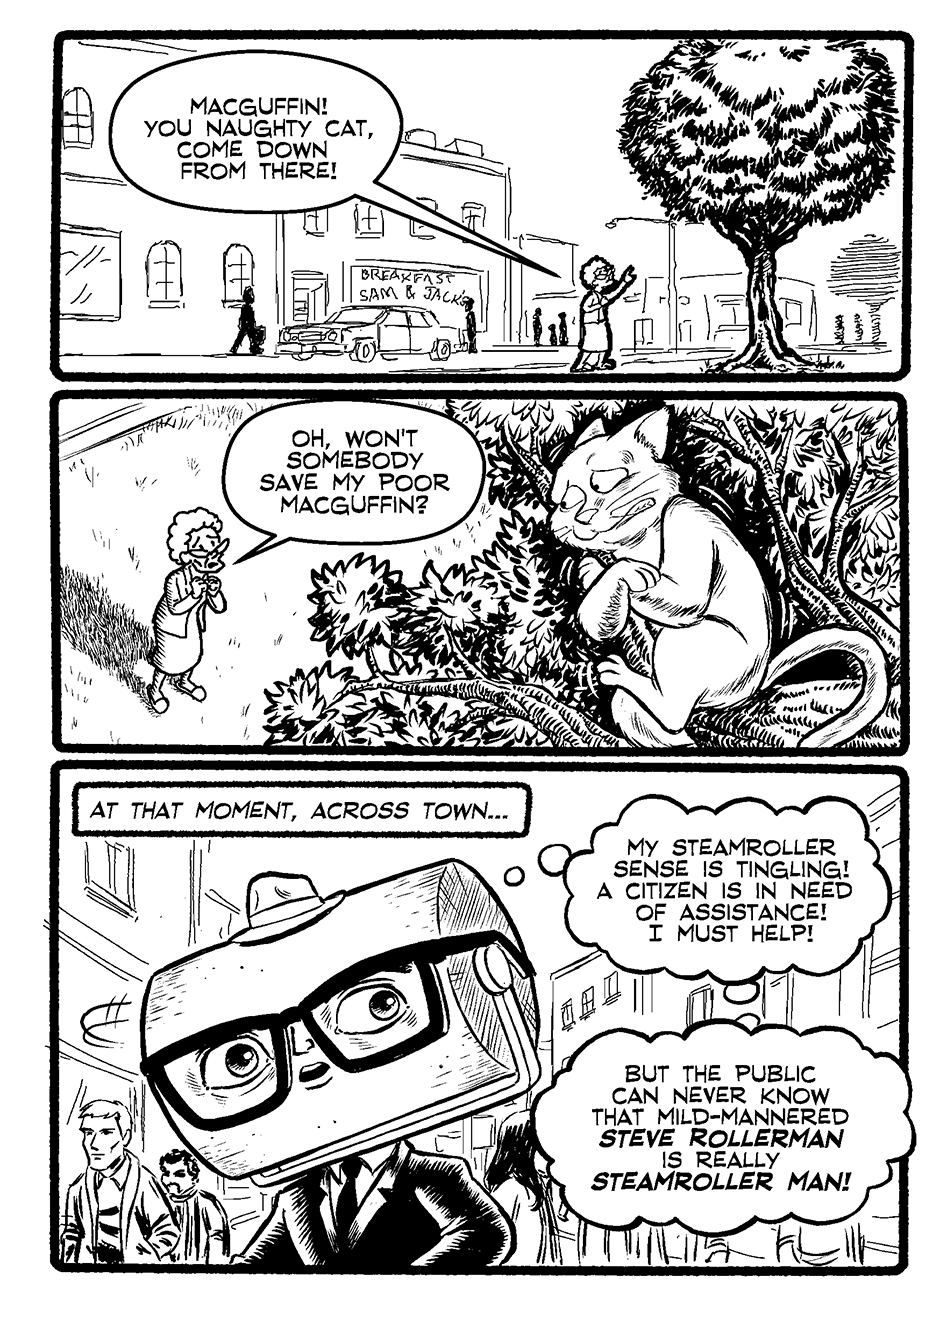 Ashcan Zine Edition, Page One